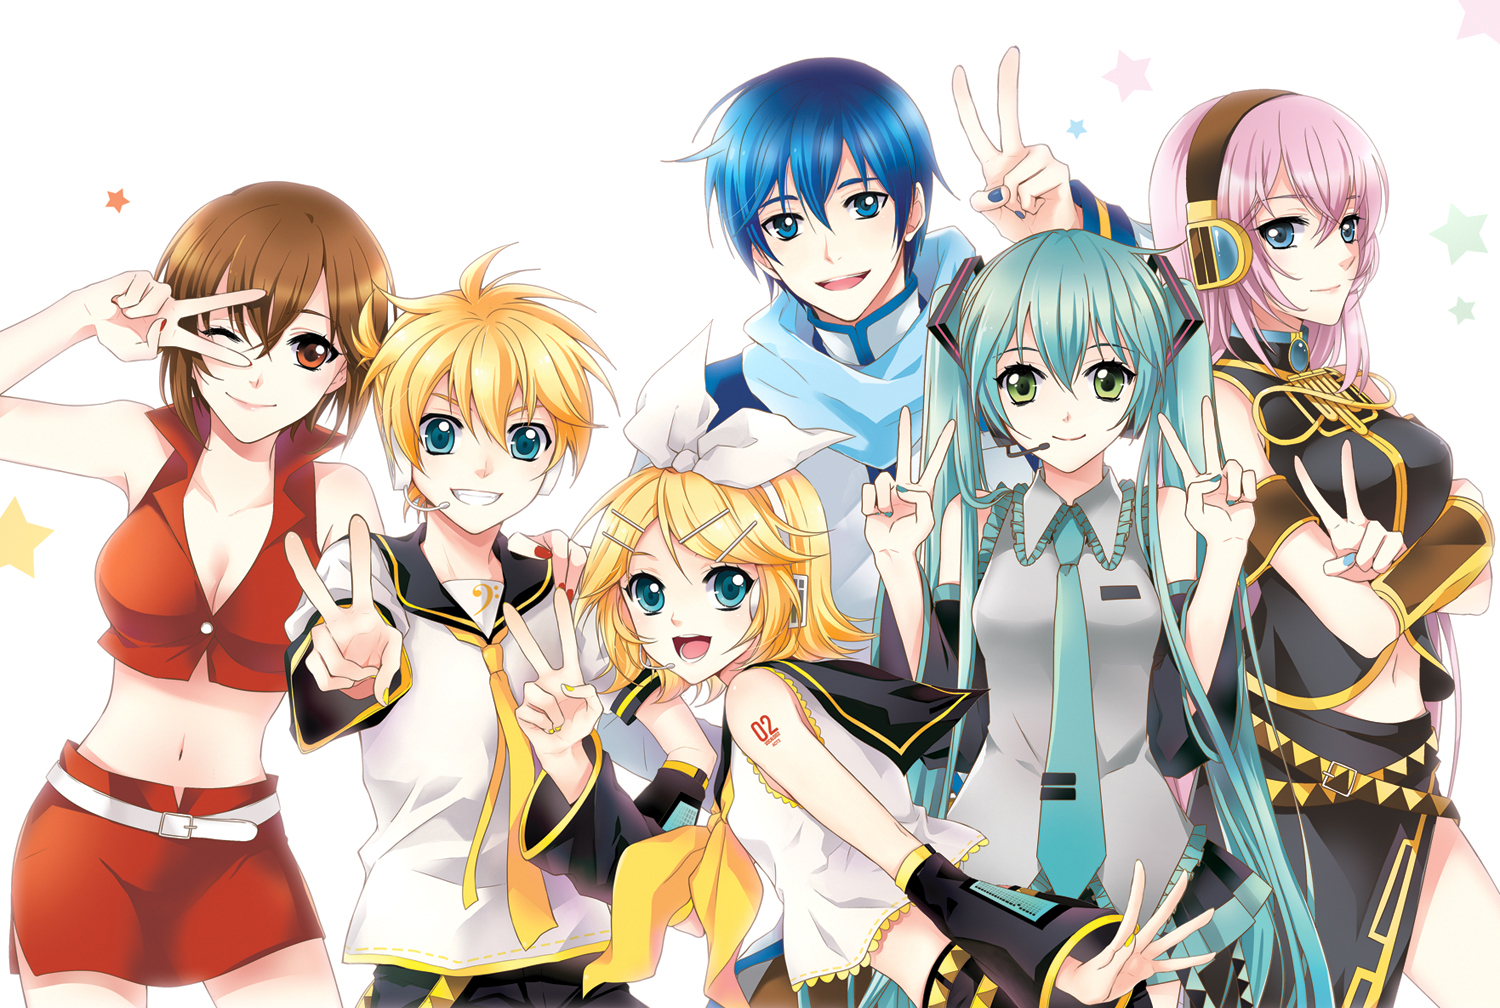 6. "Rin Kagamine" from Vocaloid - wide 6